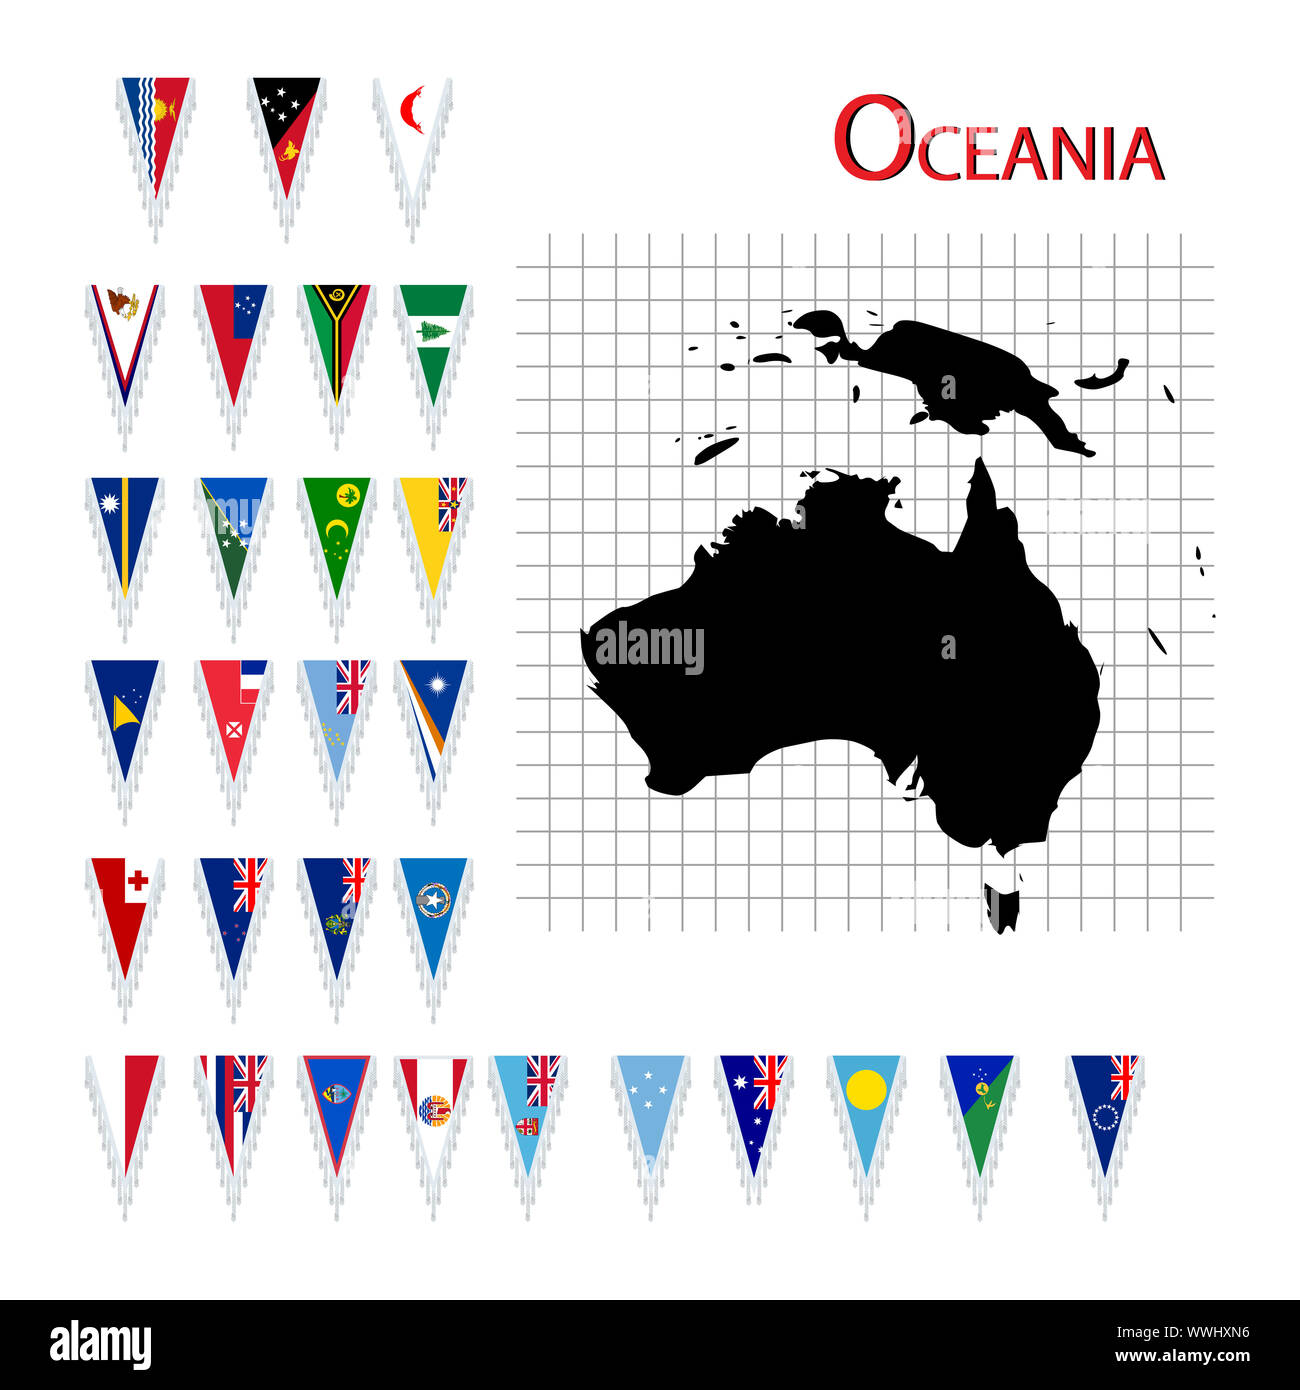 Complete set of Oceania flags and map, isolated and grouped objects over white background Stock Photo